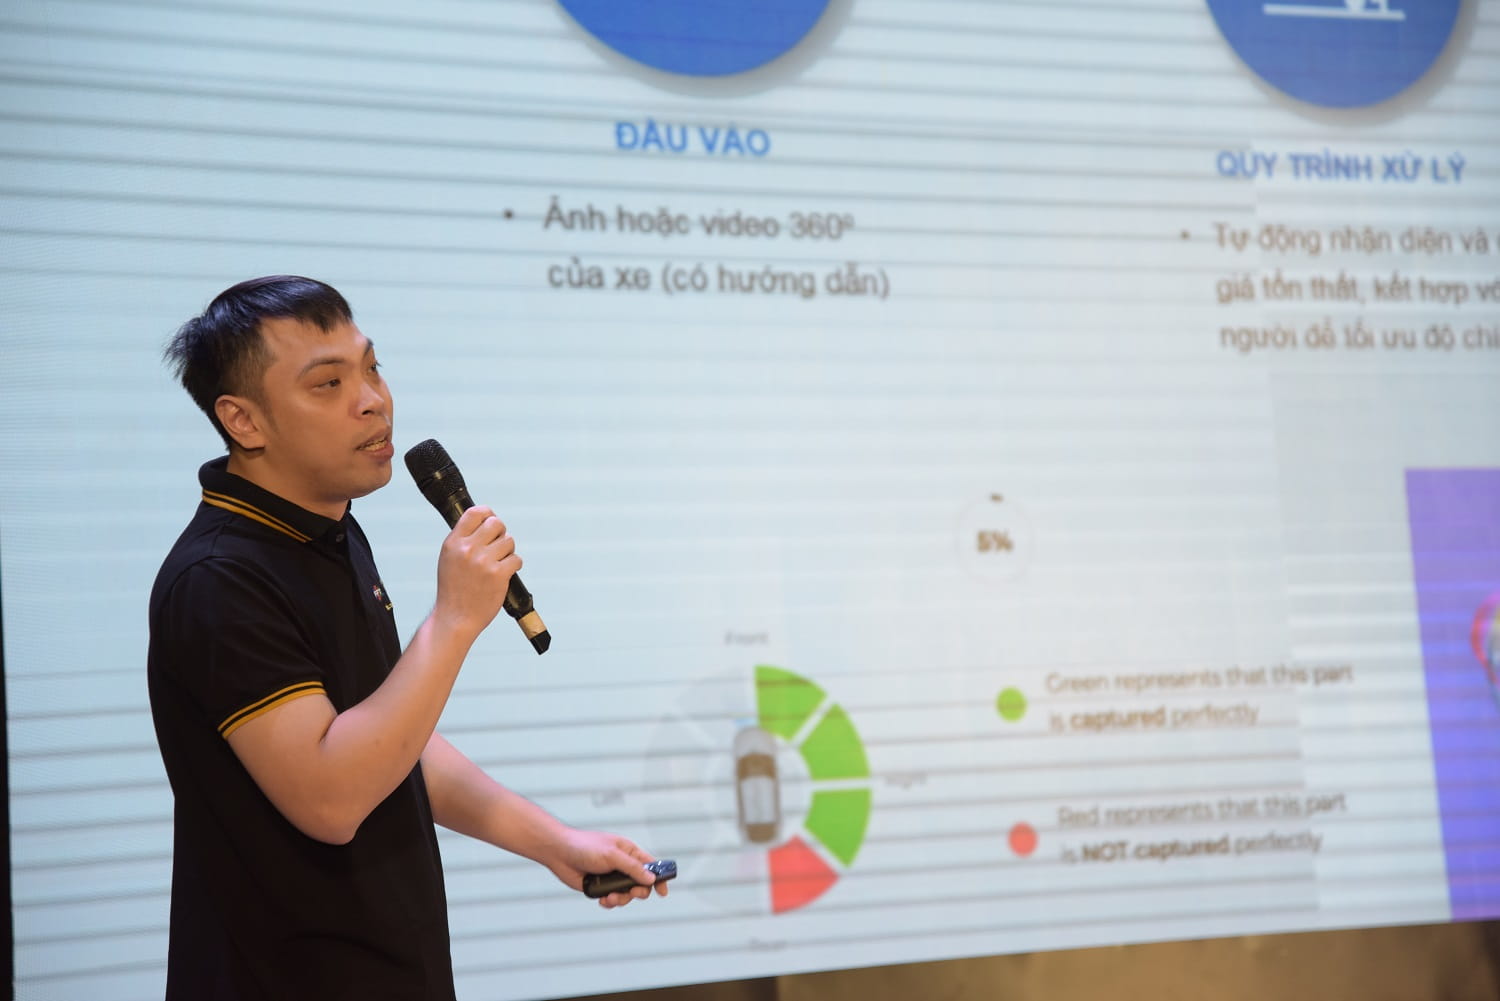 Dr. Hoang Danh Liem - Director of Computer Vision at FPT Smart Cloud Center - shared the AI topic